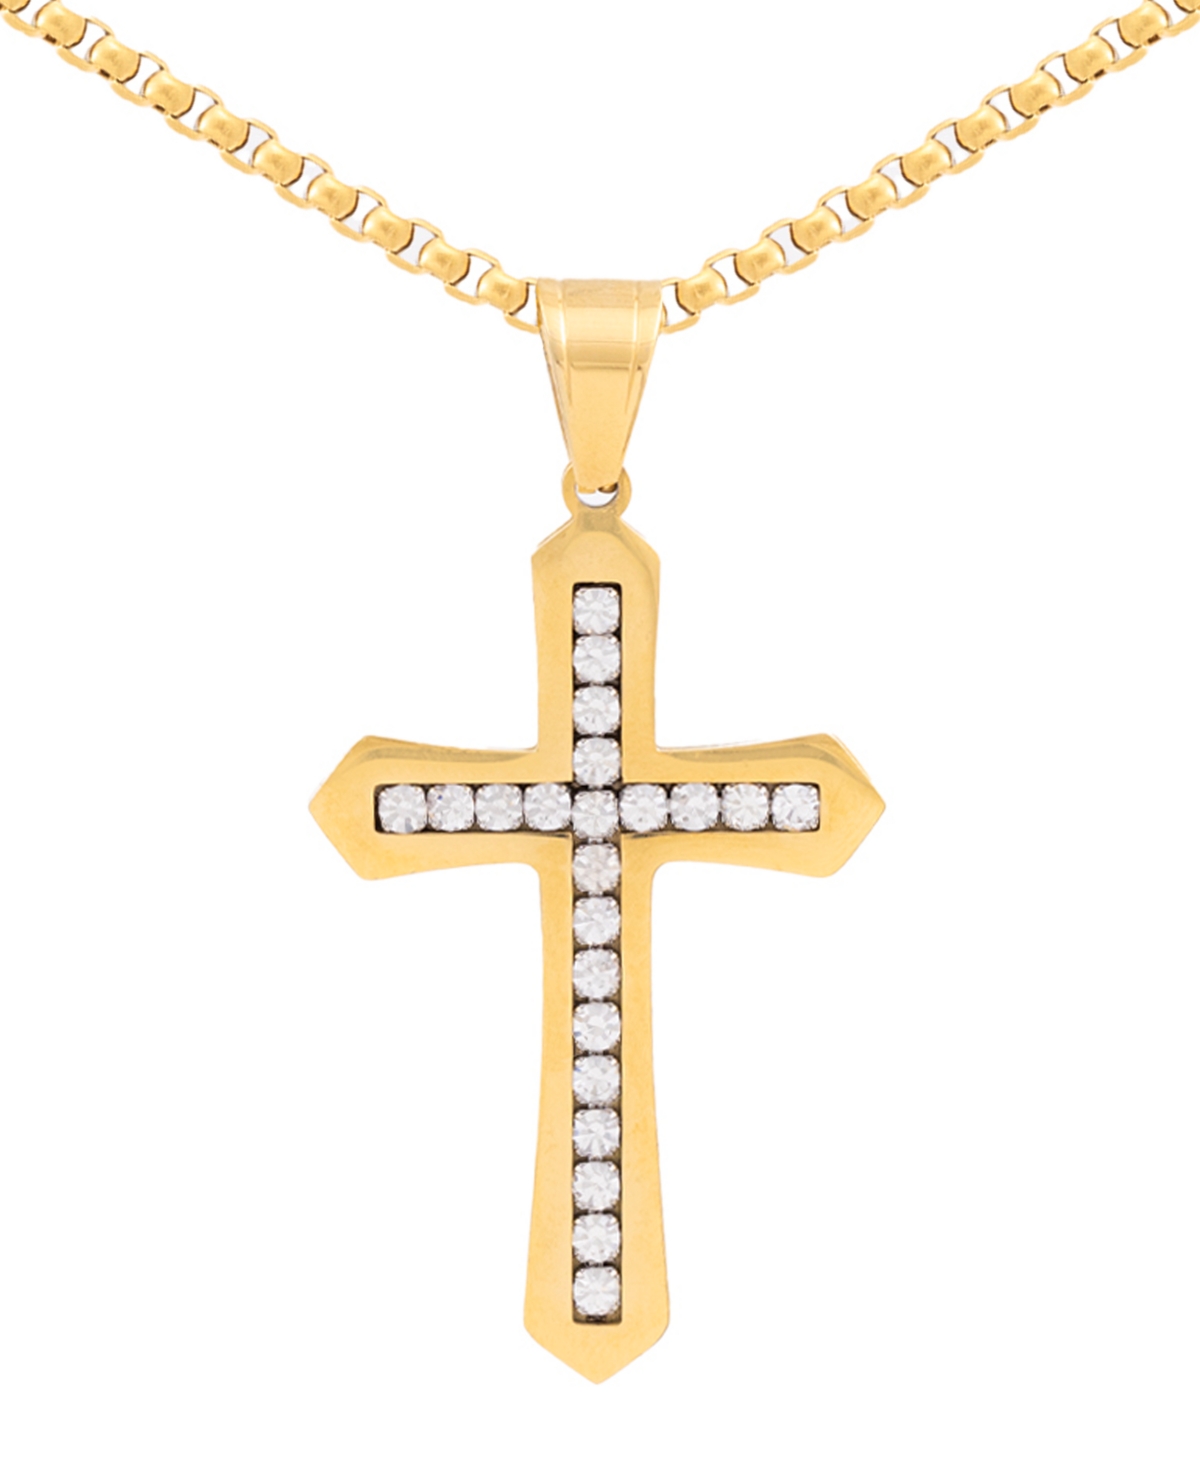 Smith Men's Cubic Zirconia Cross 24" Pendant Necklace in Gold-Tone Ion-Plated Stainless Steel - Gold-Tone